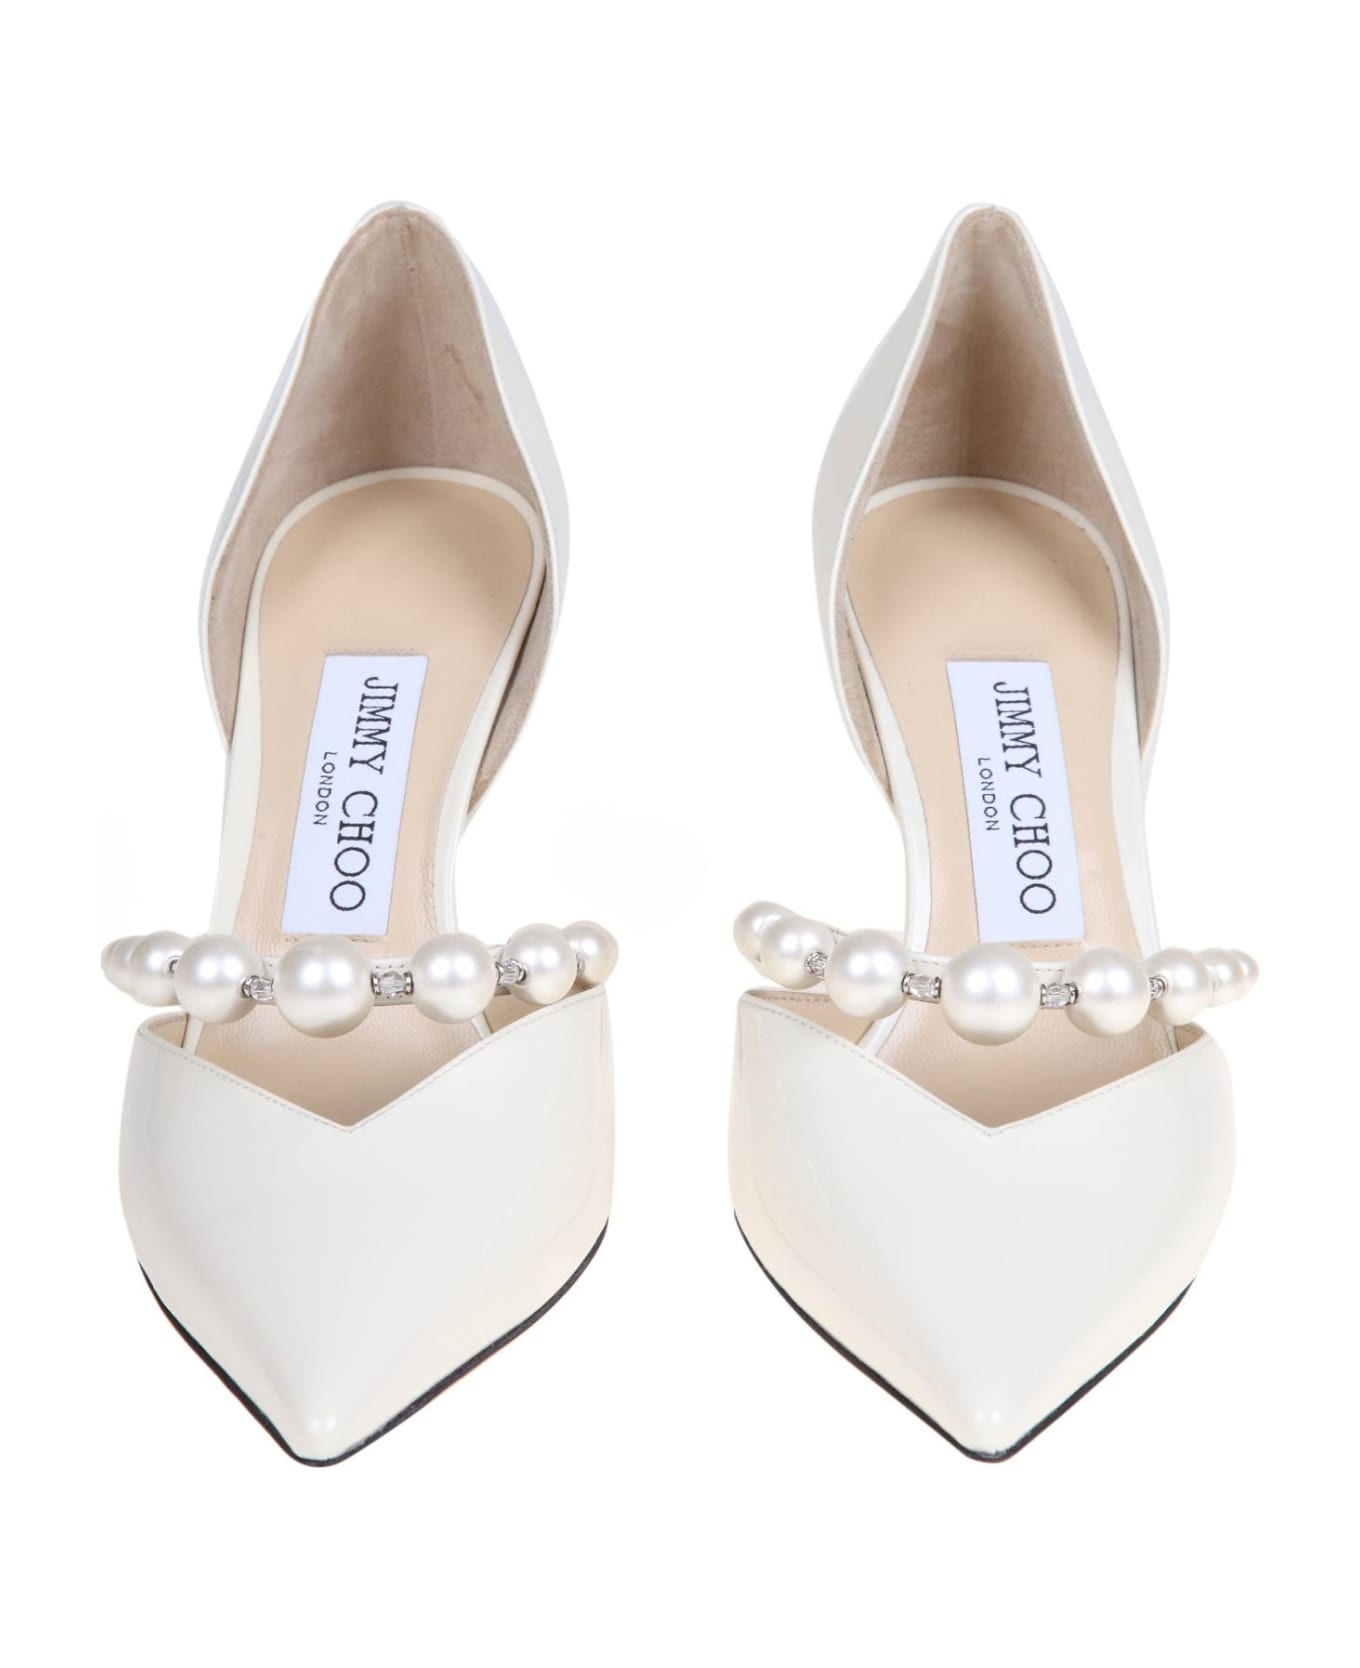 Aurelie 85 Patent Leather Pumps With Applied Pearls - 3